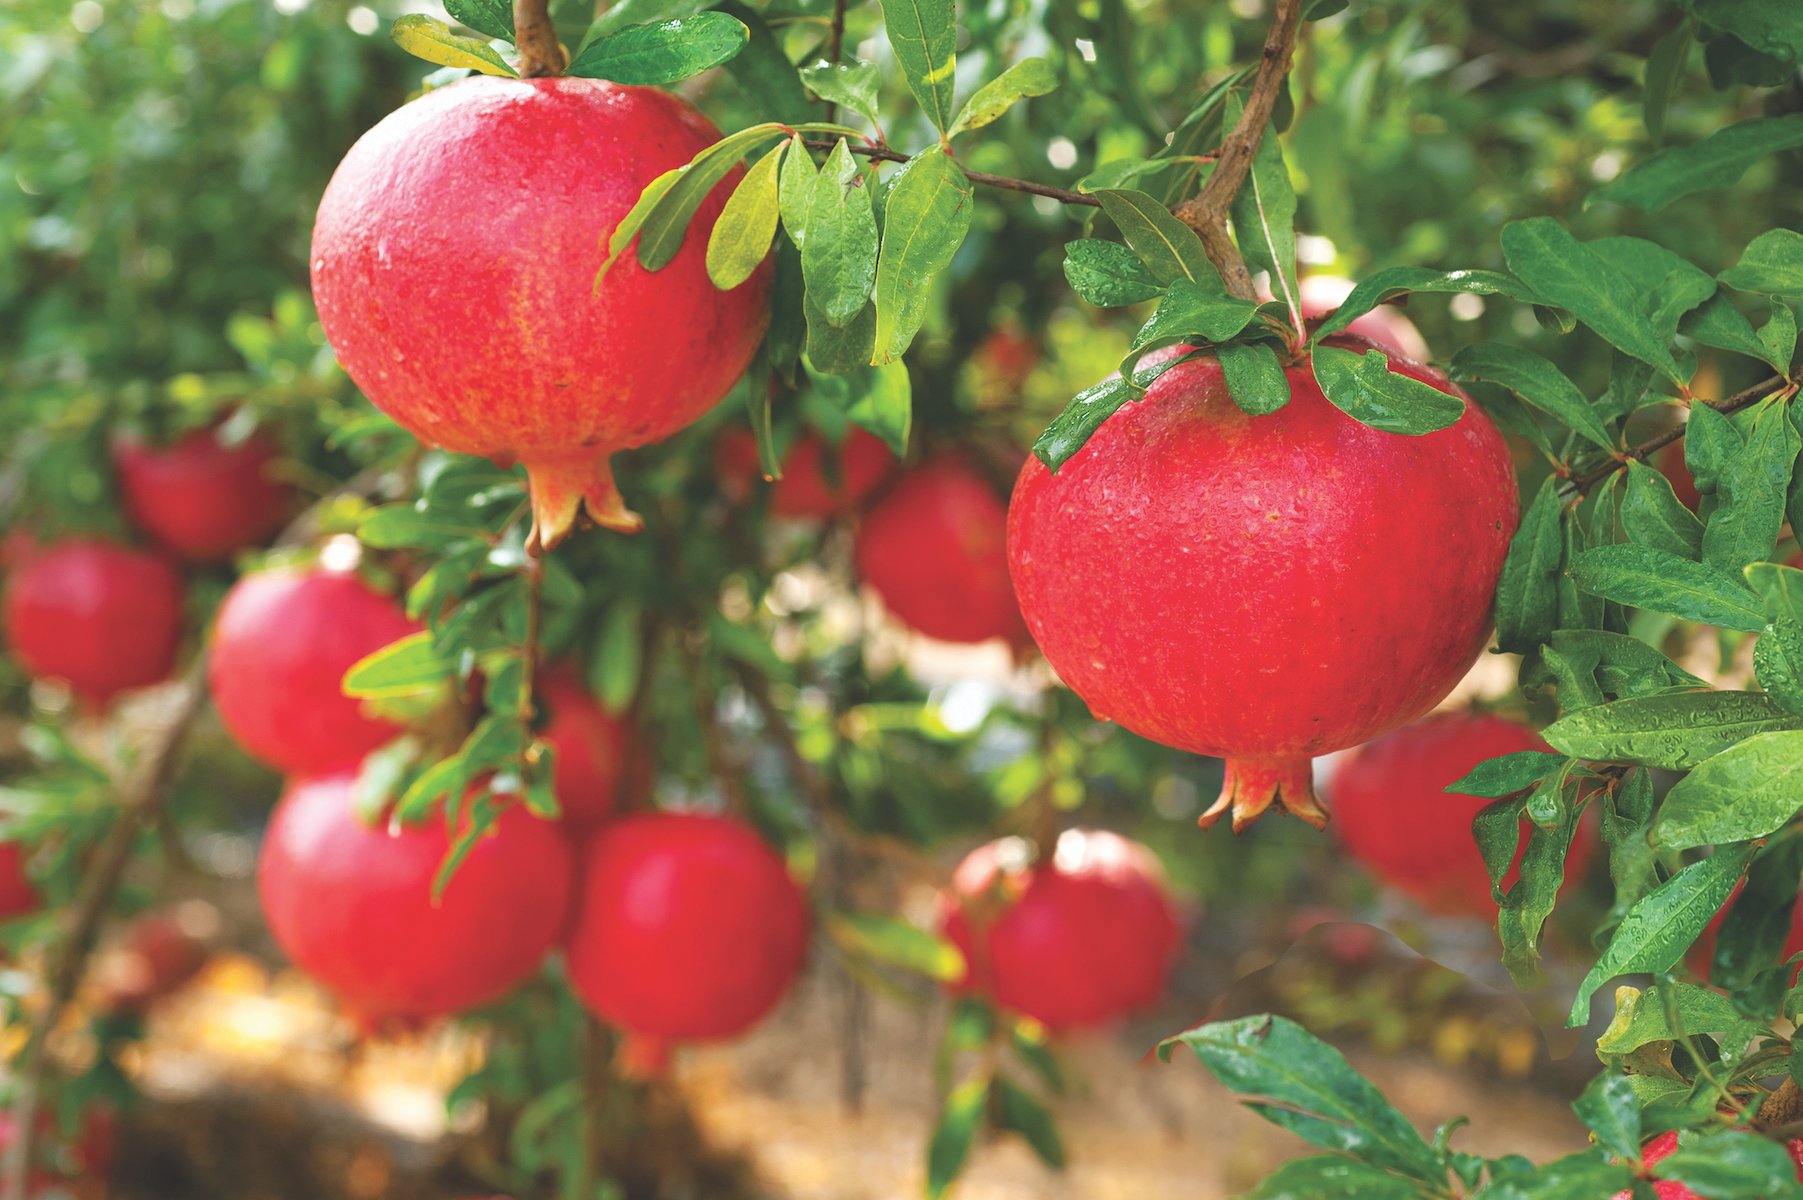 Fruits you can farm and grow in a greenhouse: Pomegranates